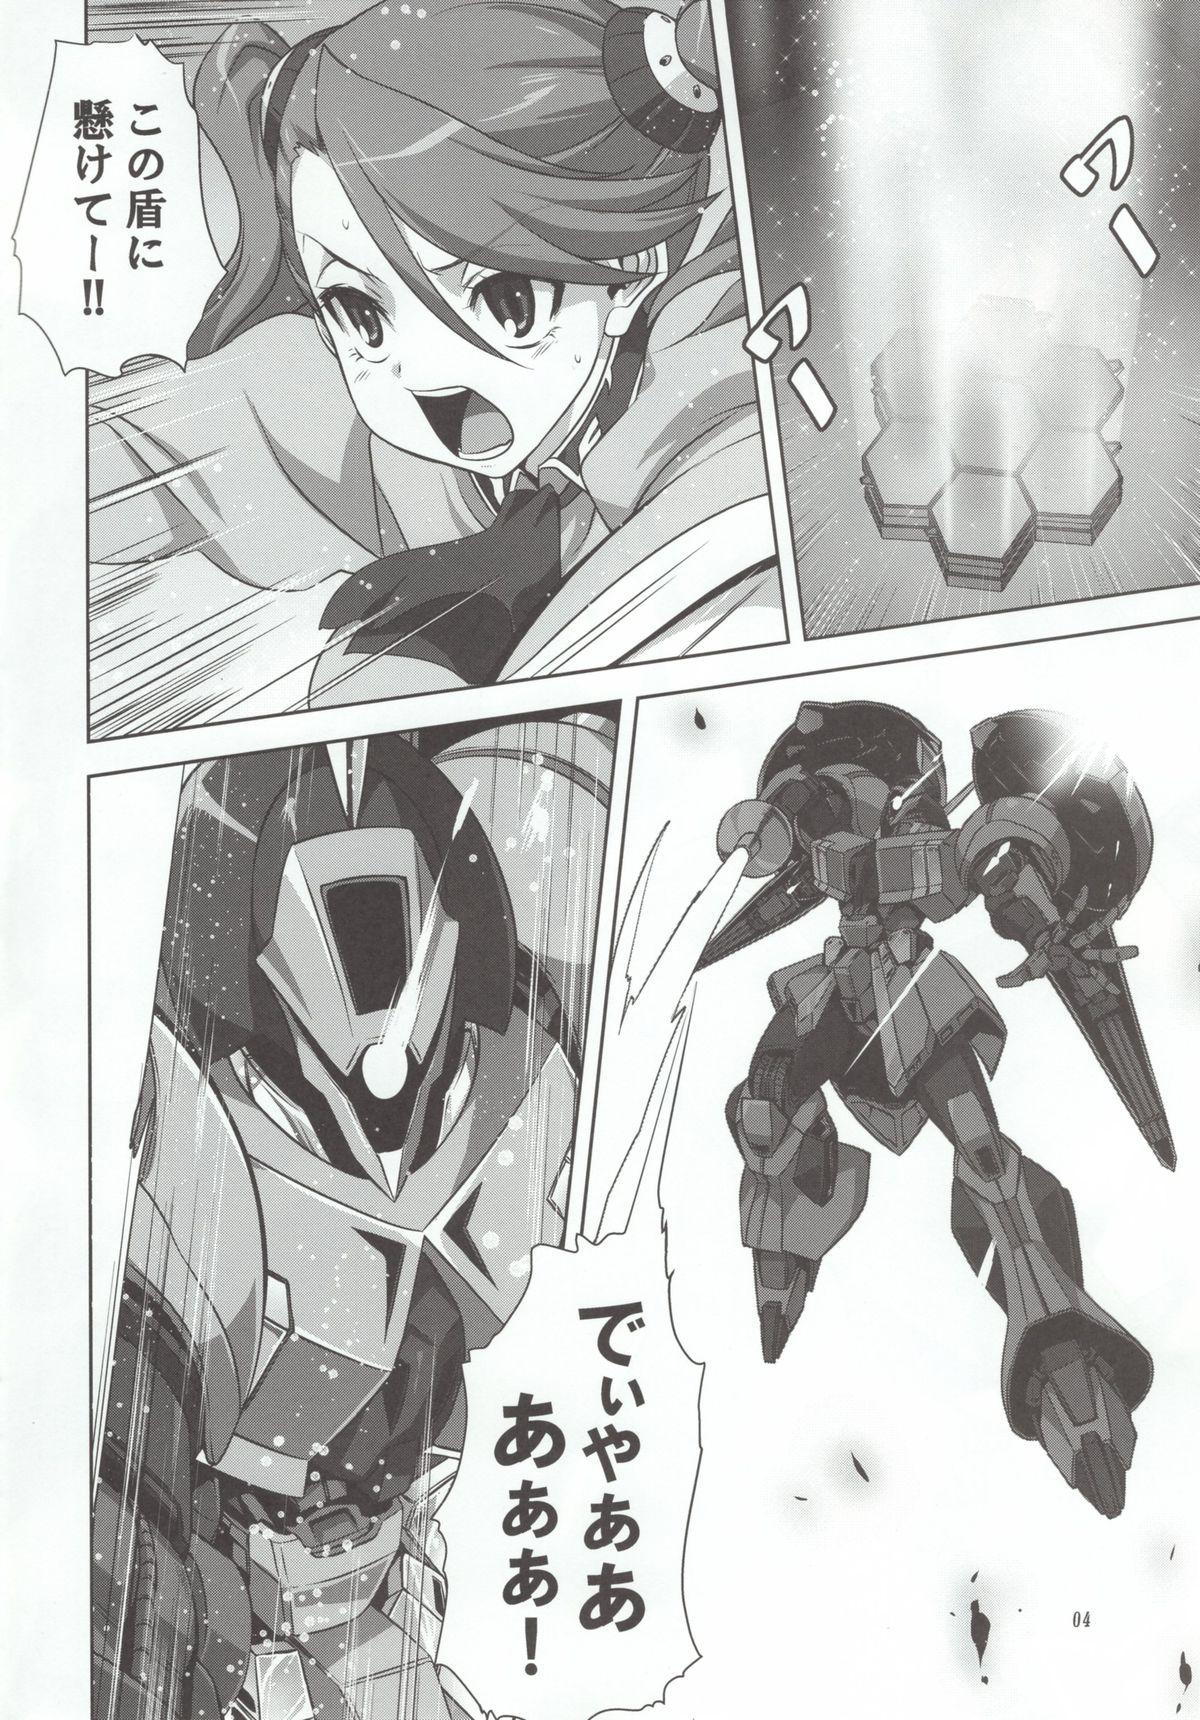 Sweet Try Fight! - Gundam build fighters try Instagram - Page 4